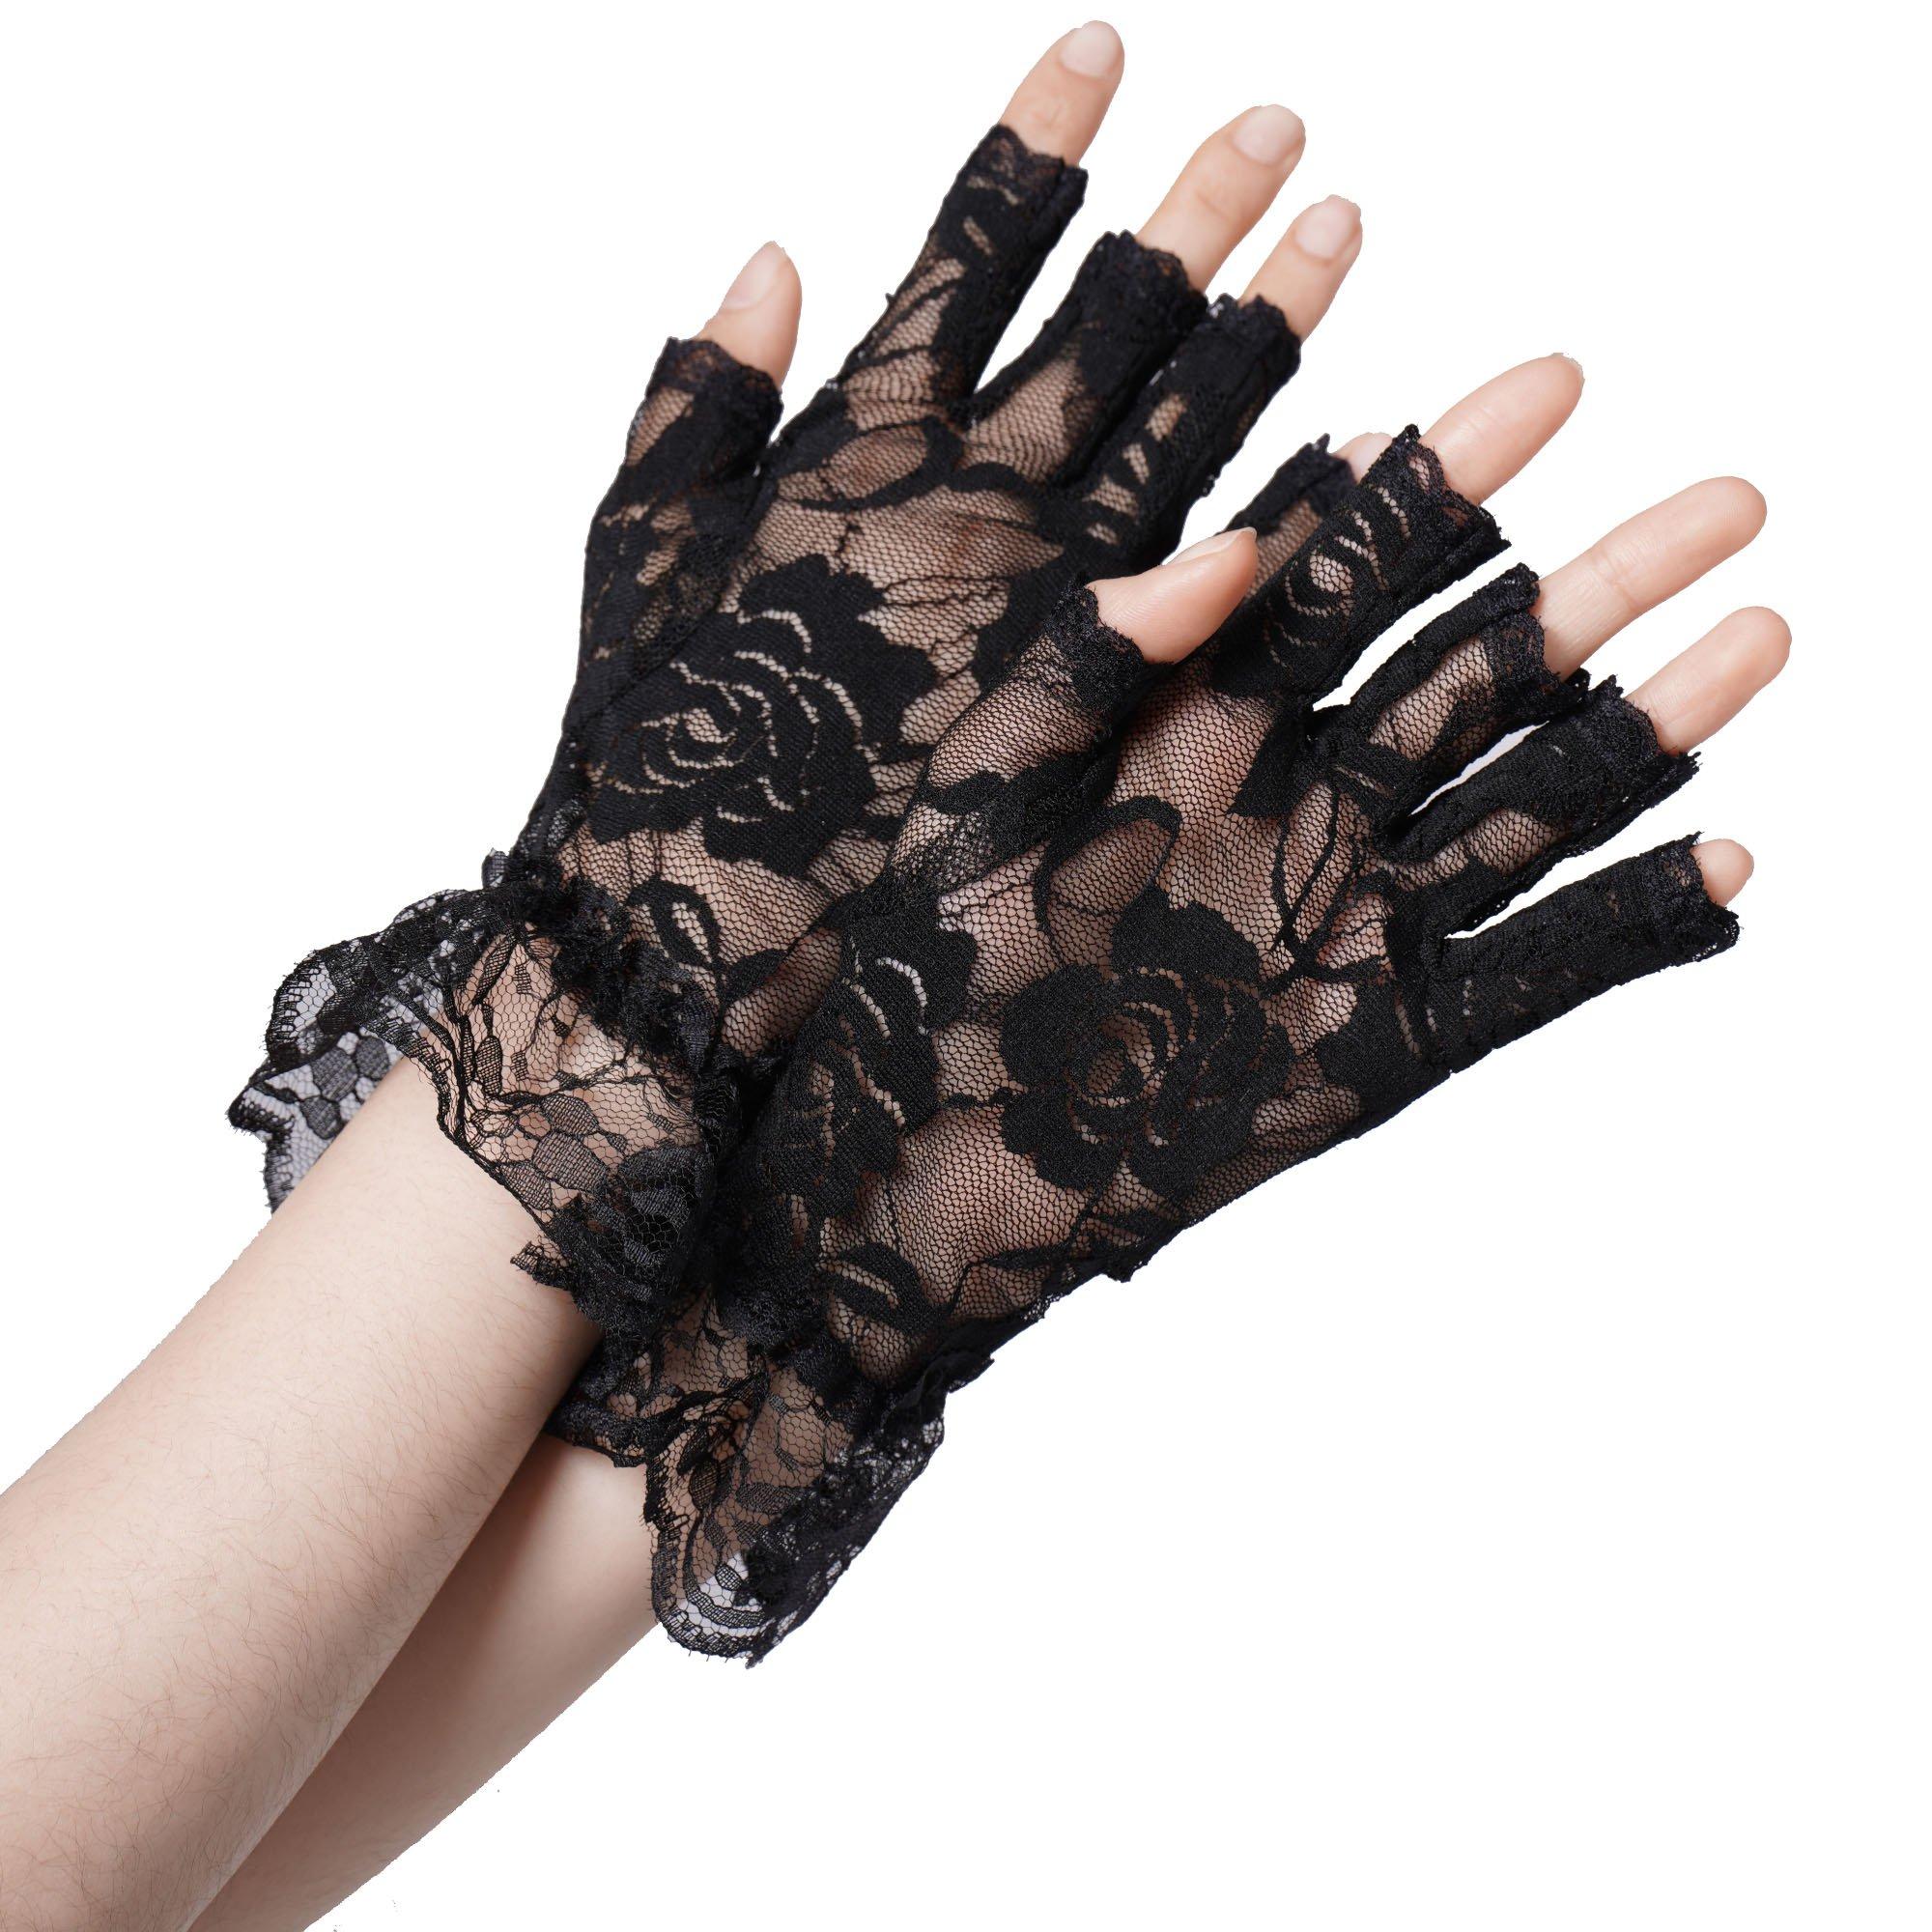 20 Black Fingerless Lace Women Adult Halloween Gloves Costume Accessory -  One Size